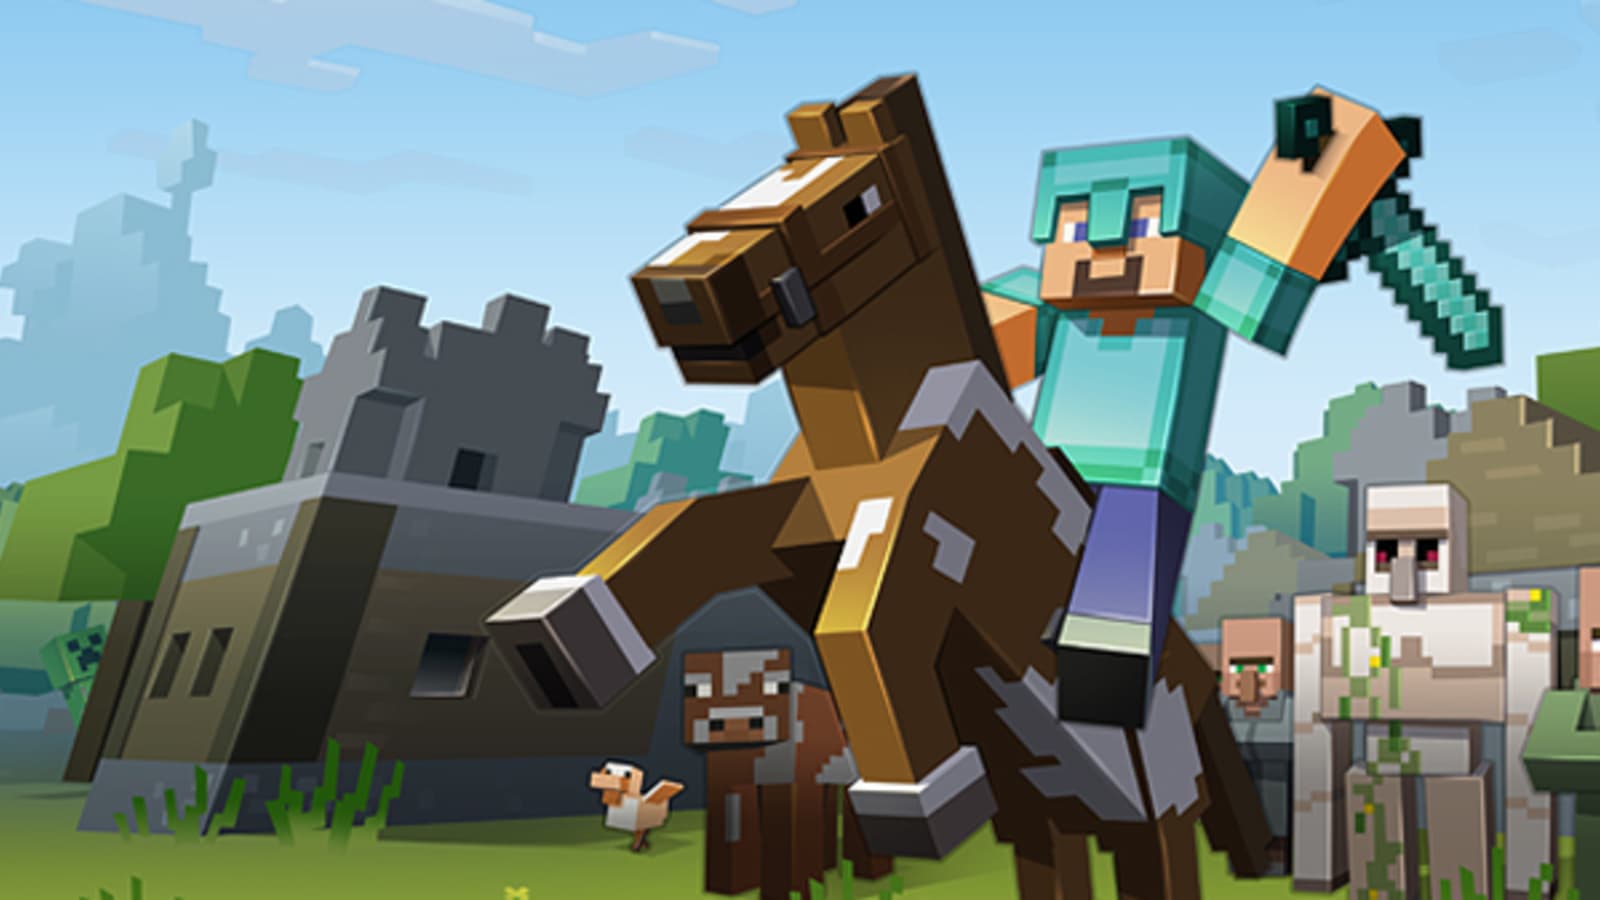 Roblox, Minecraft video games will turn kids into money wizards? Cool  lessons here